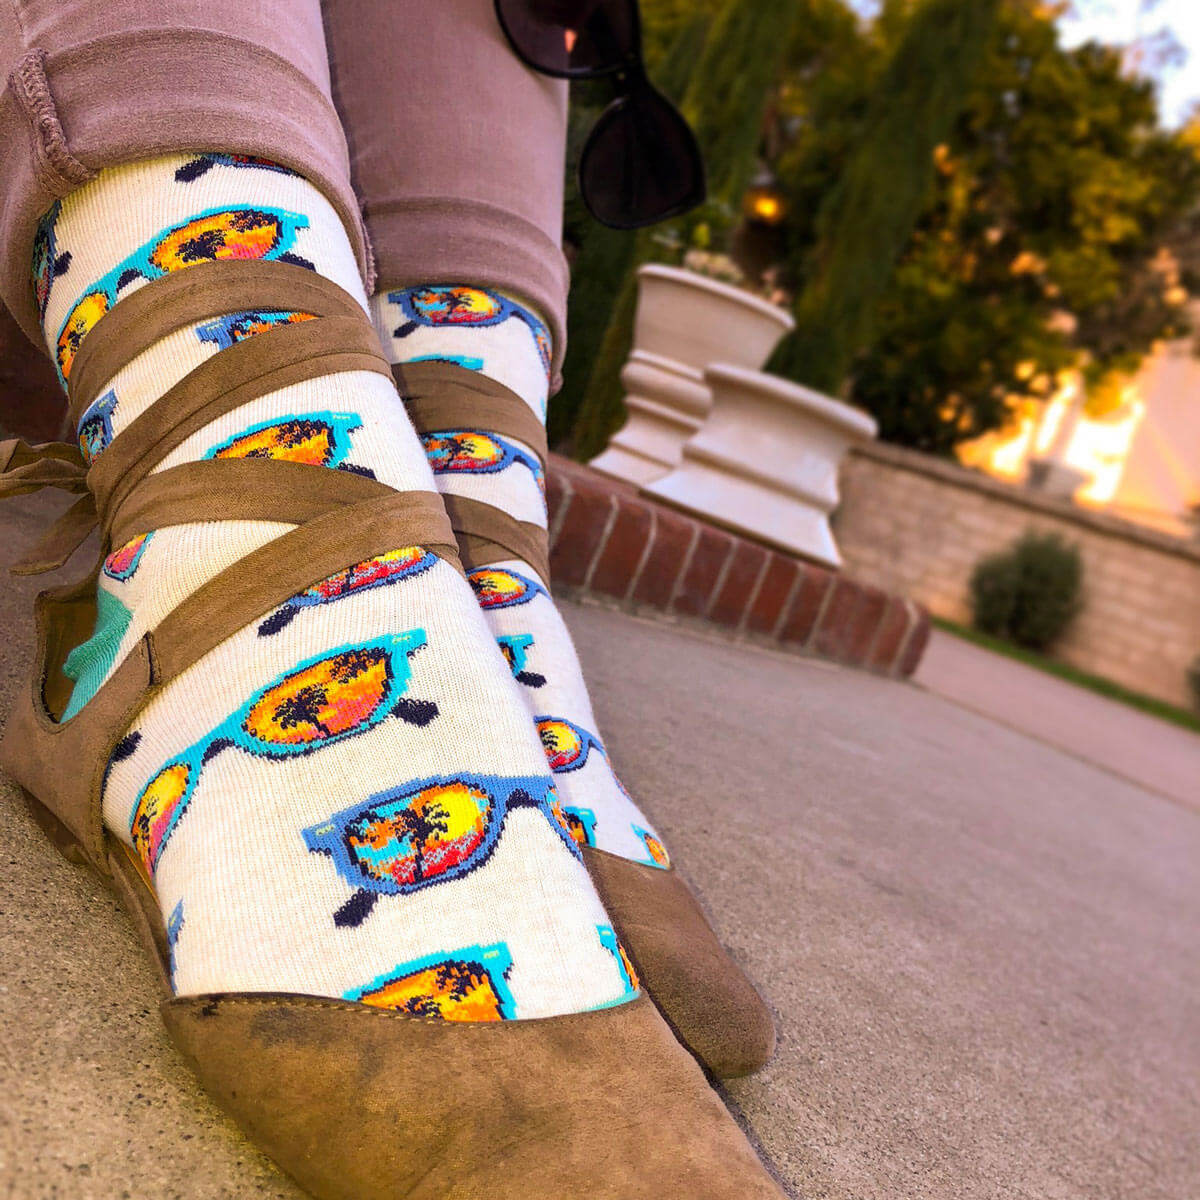 These ivory crew socks feature cute blue summer sunglasses reflecting a colorful sunset and palm trees.